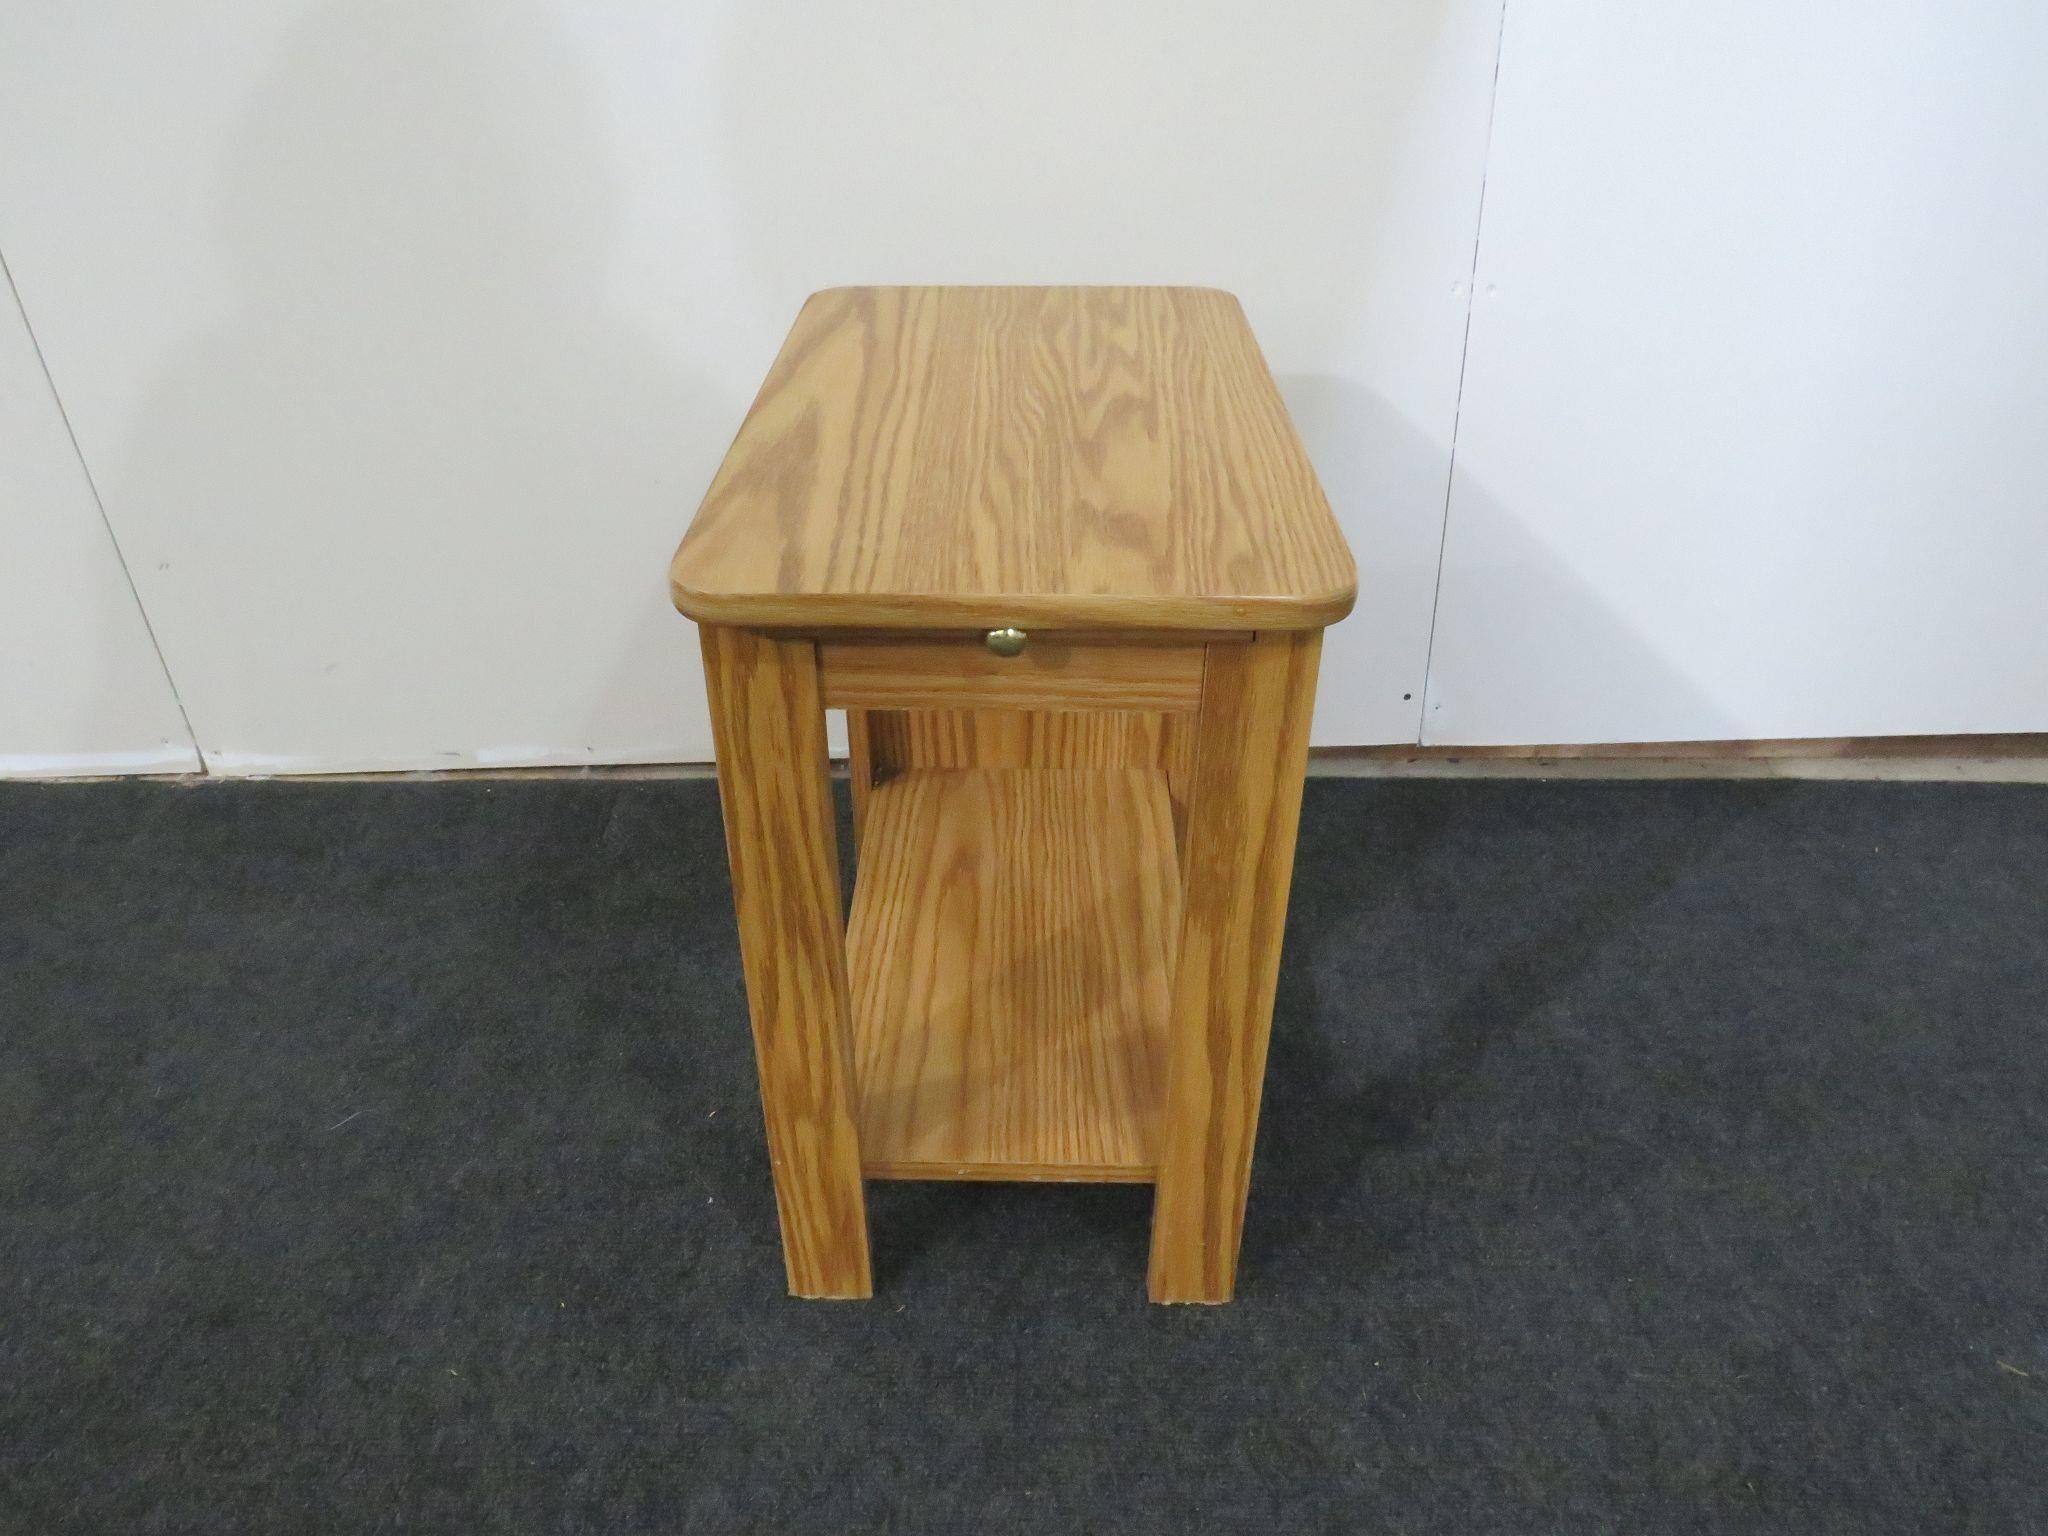 12" X 20" SMALL END TABLE